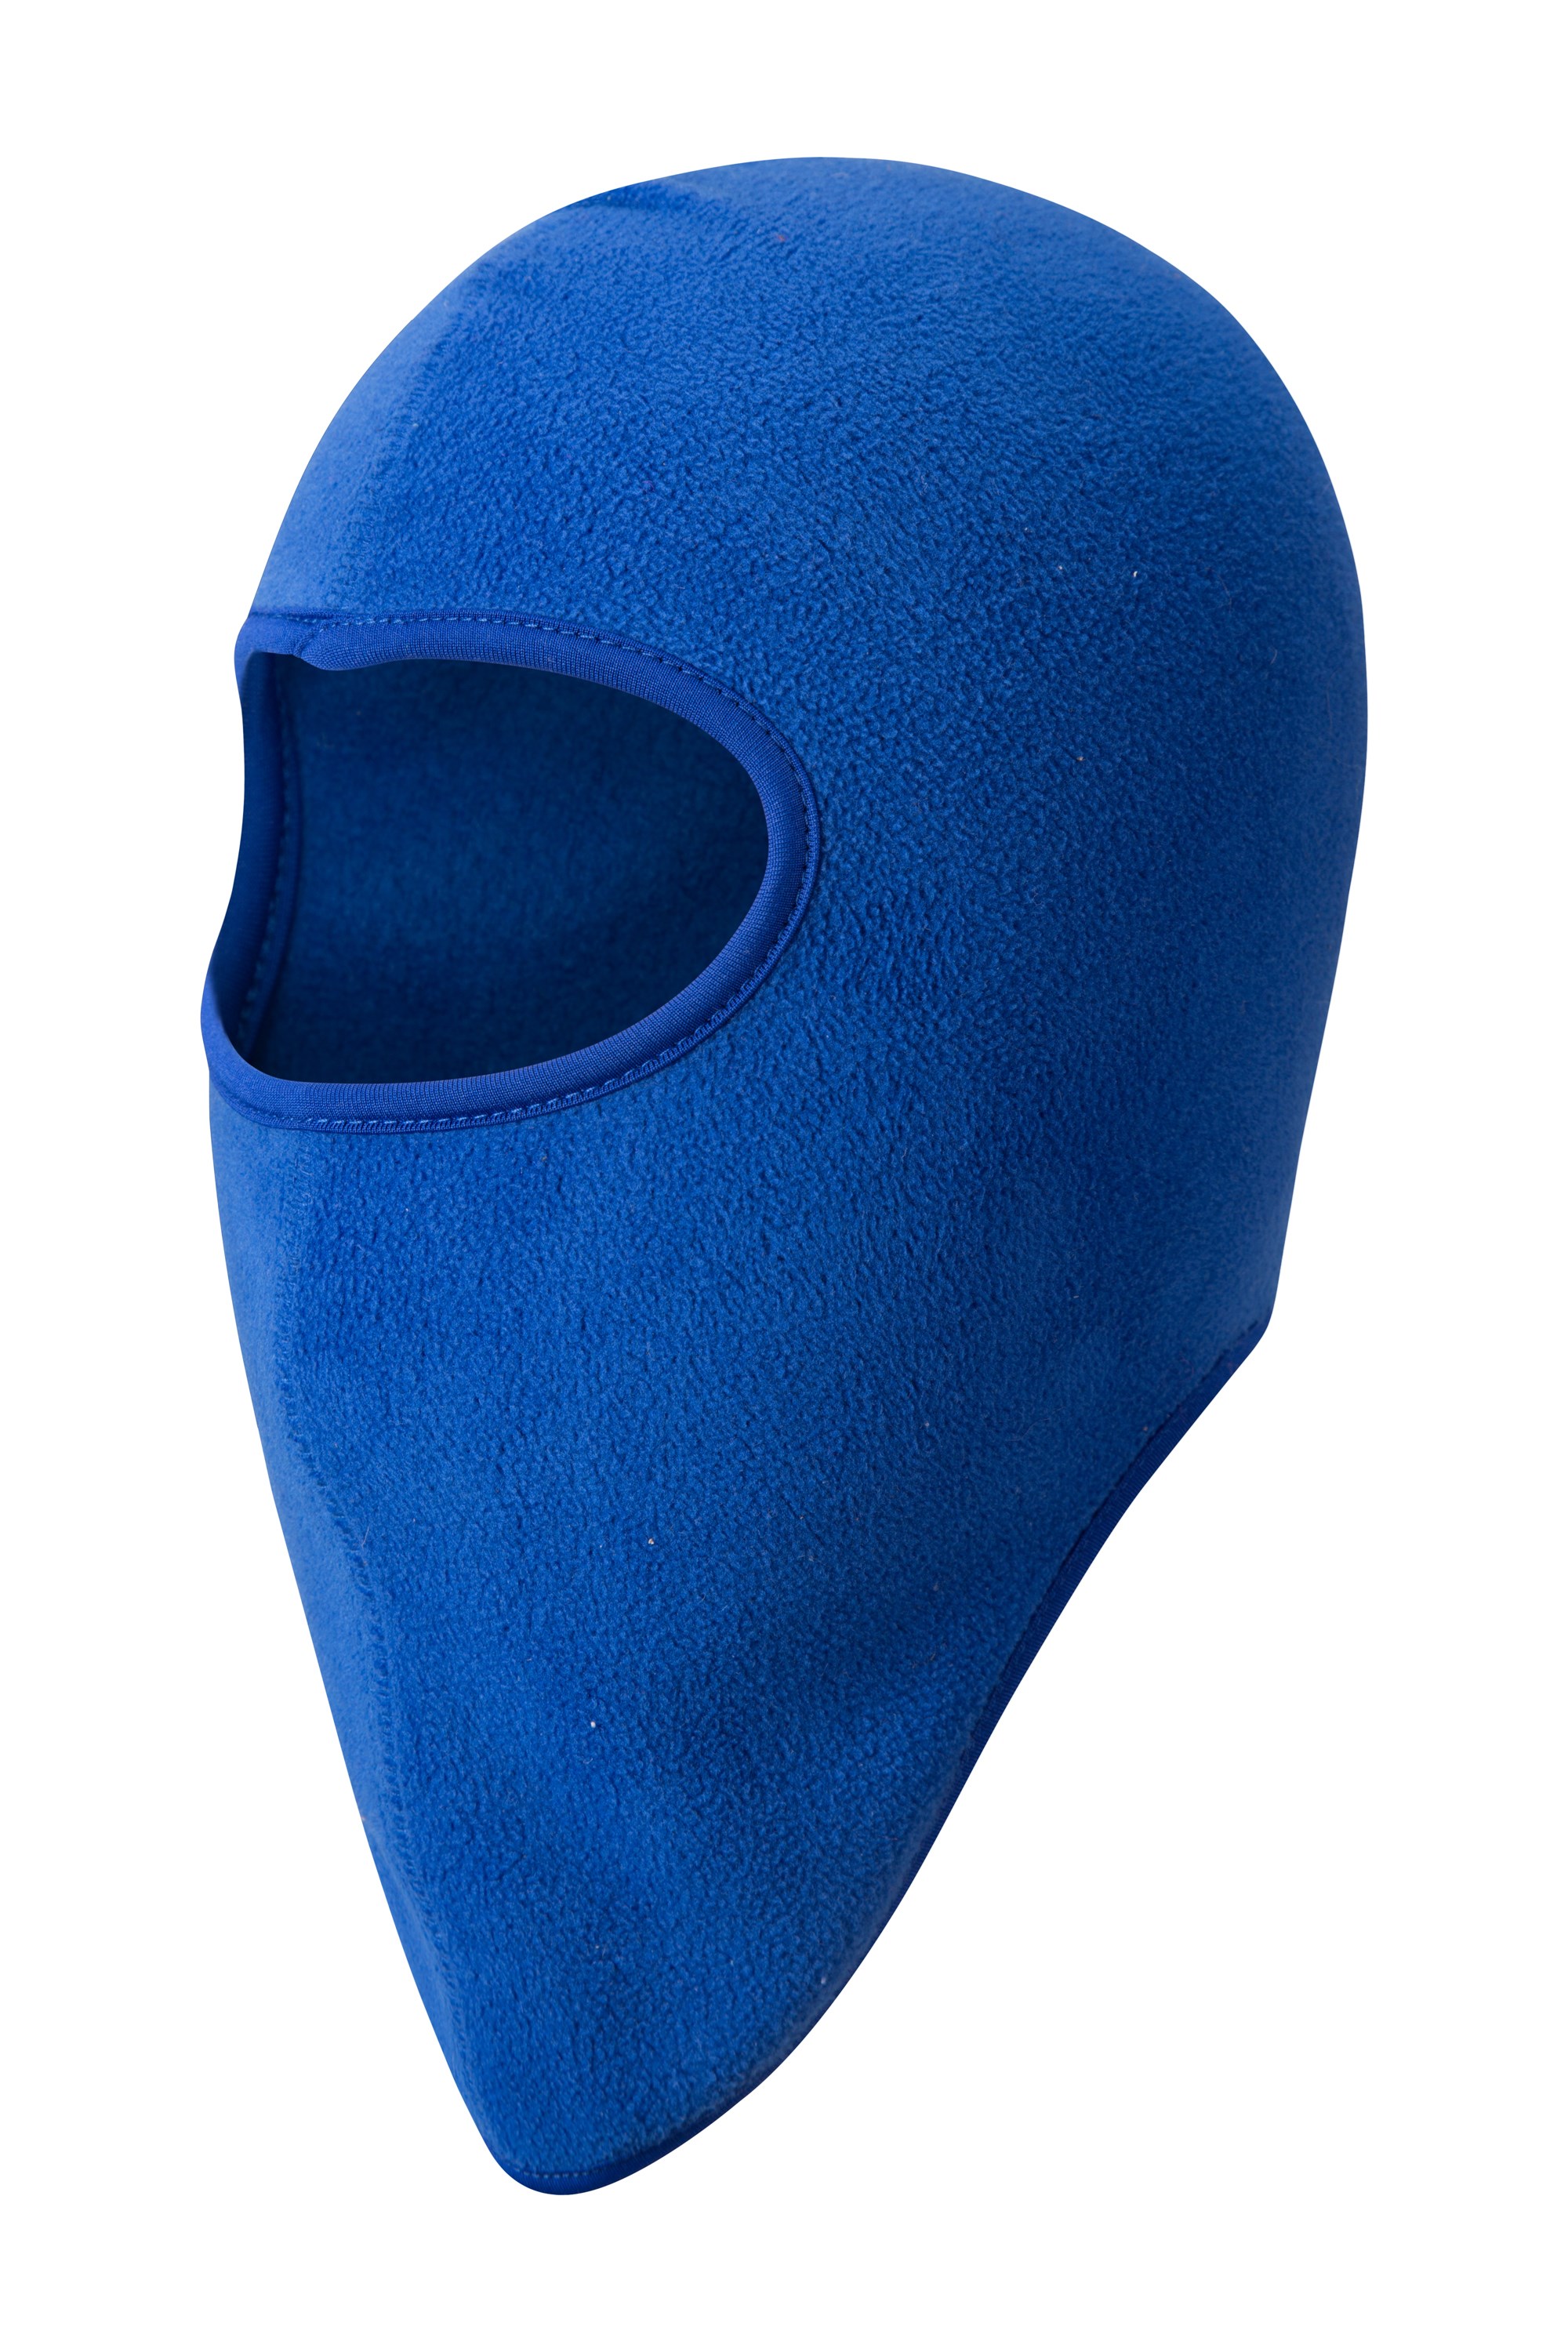 Antipill Mountain Warehouse Kids Micro Fleece Balaclava Ideal For Very Cold Winter Weather & Skiing Trips Easy to Pack Lightweight 